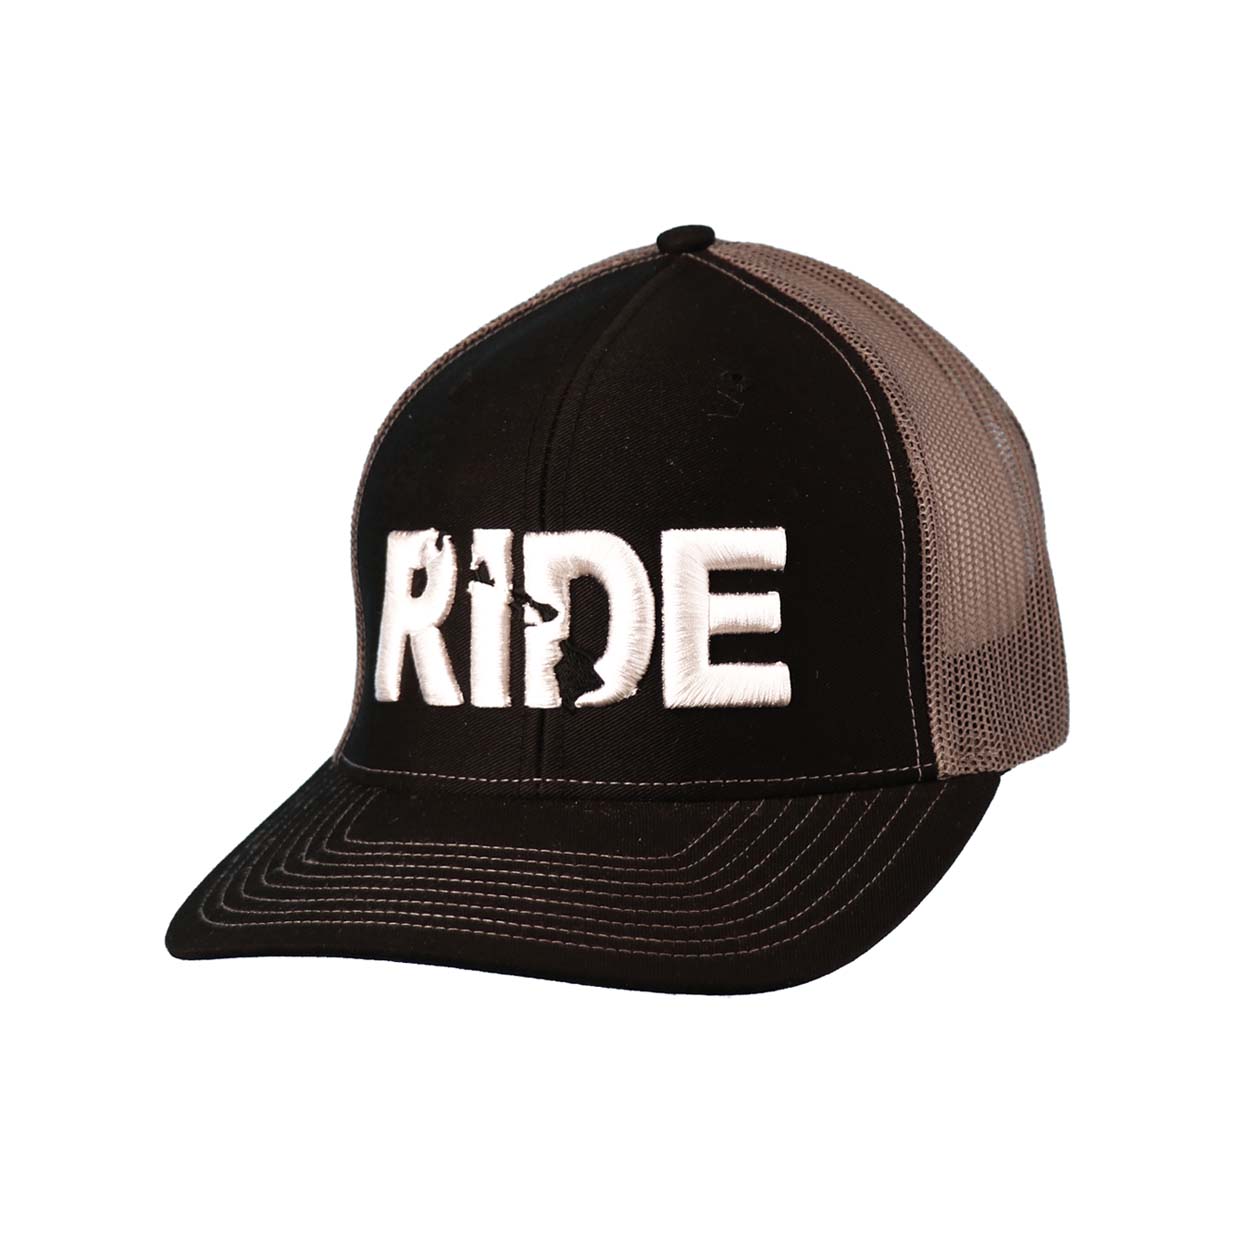 Ride Hawaii Classic Pro 3D Puff Embroidered Snapback Trucker Hat Black/Gray